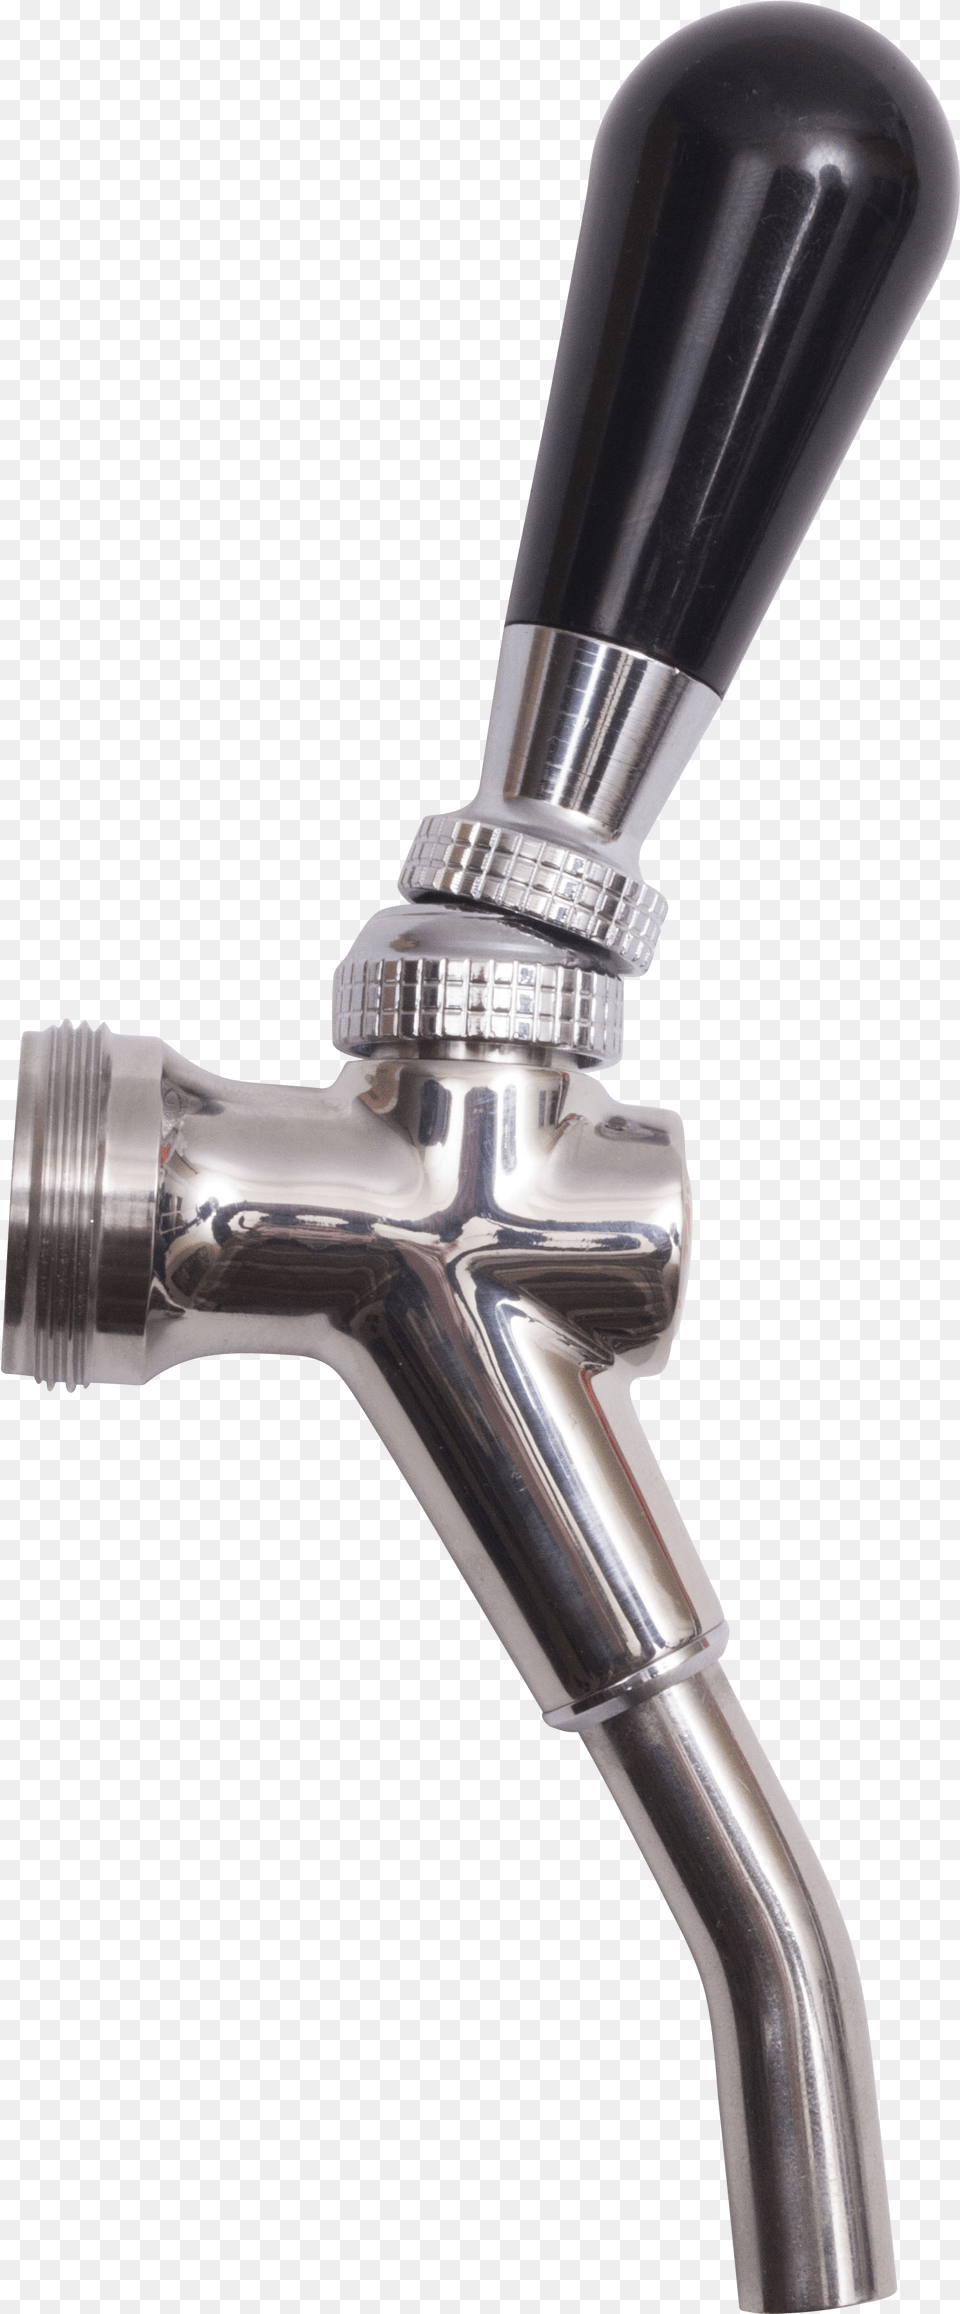 Cmb V3s Forward Seal Creamer Stainless Steel Faucet, Smoke Pipe, Tap, Sink, Sink Faucet Free Transparent Png